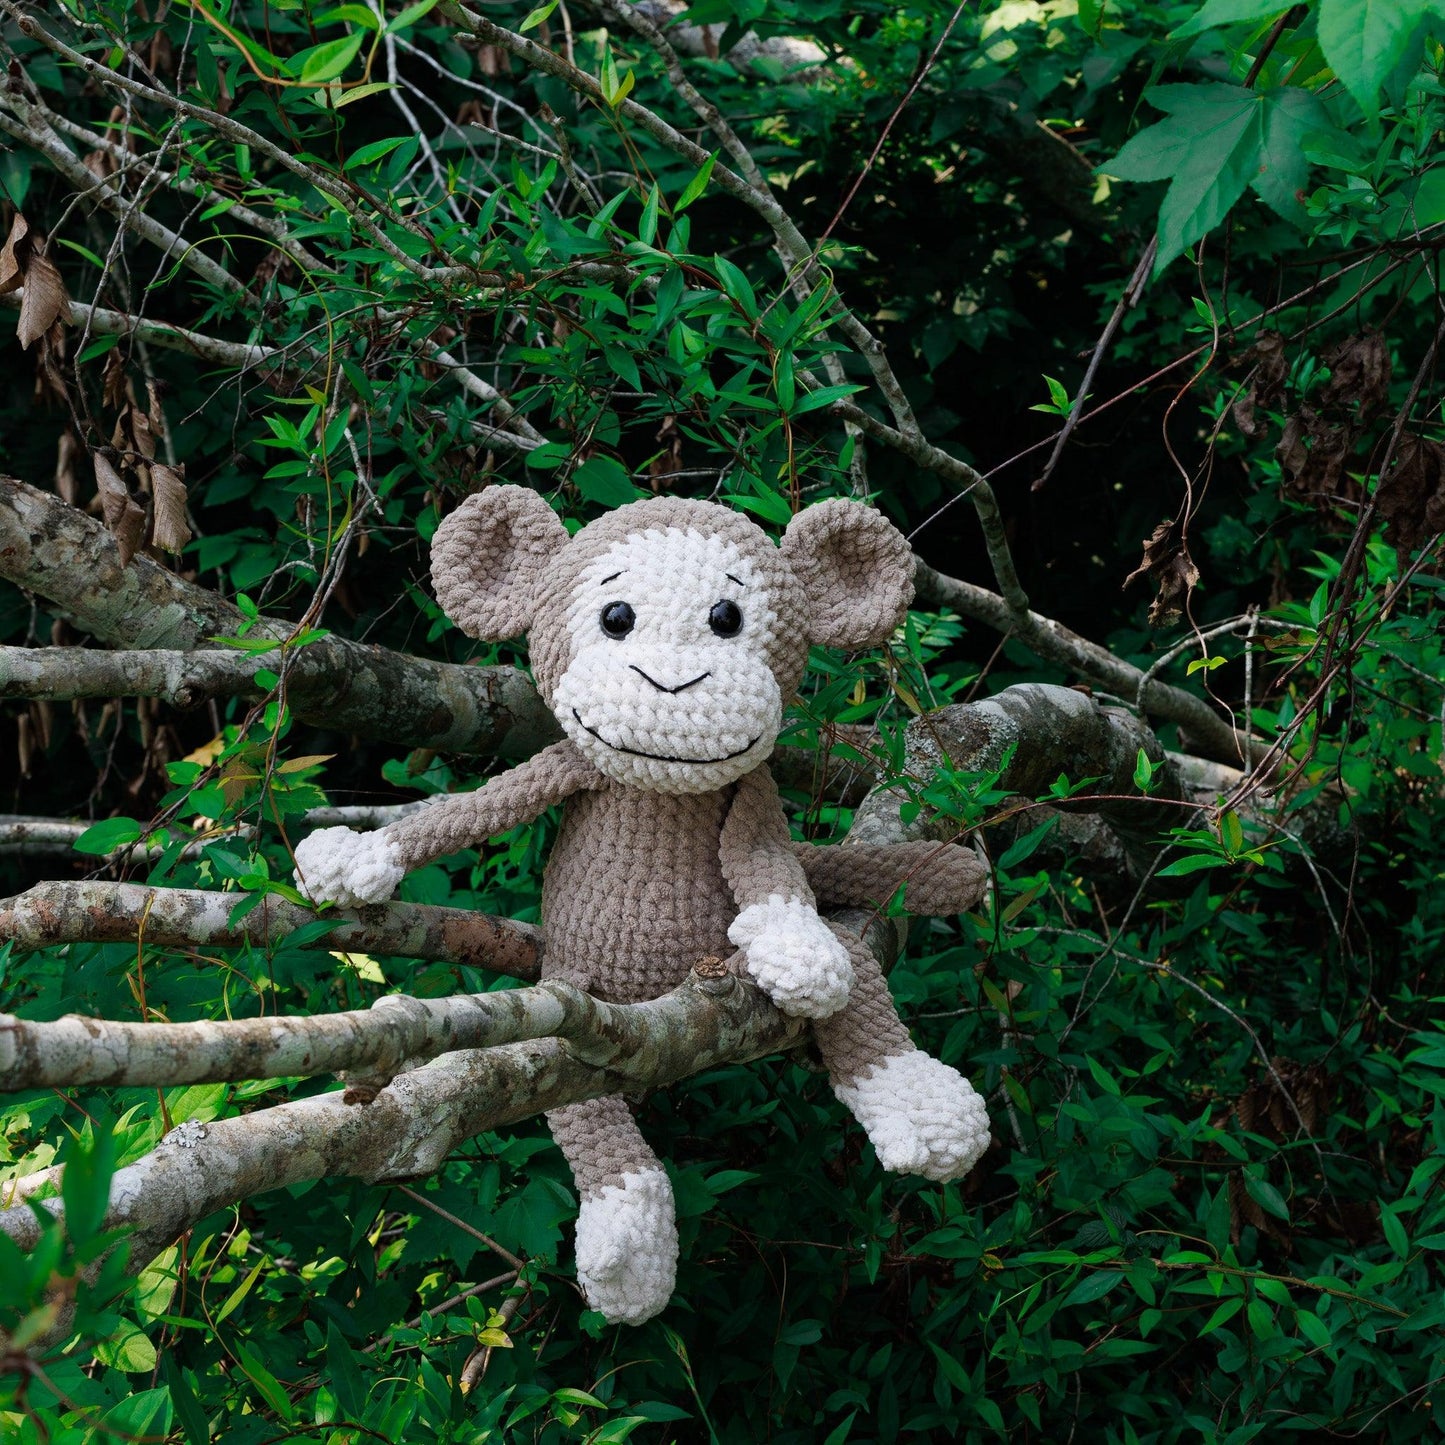 4Stitches Designs 25 Inch Crochet Monkey Plush Toy - Hand-Made Stuffed Animal for Kids